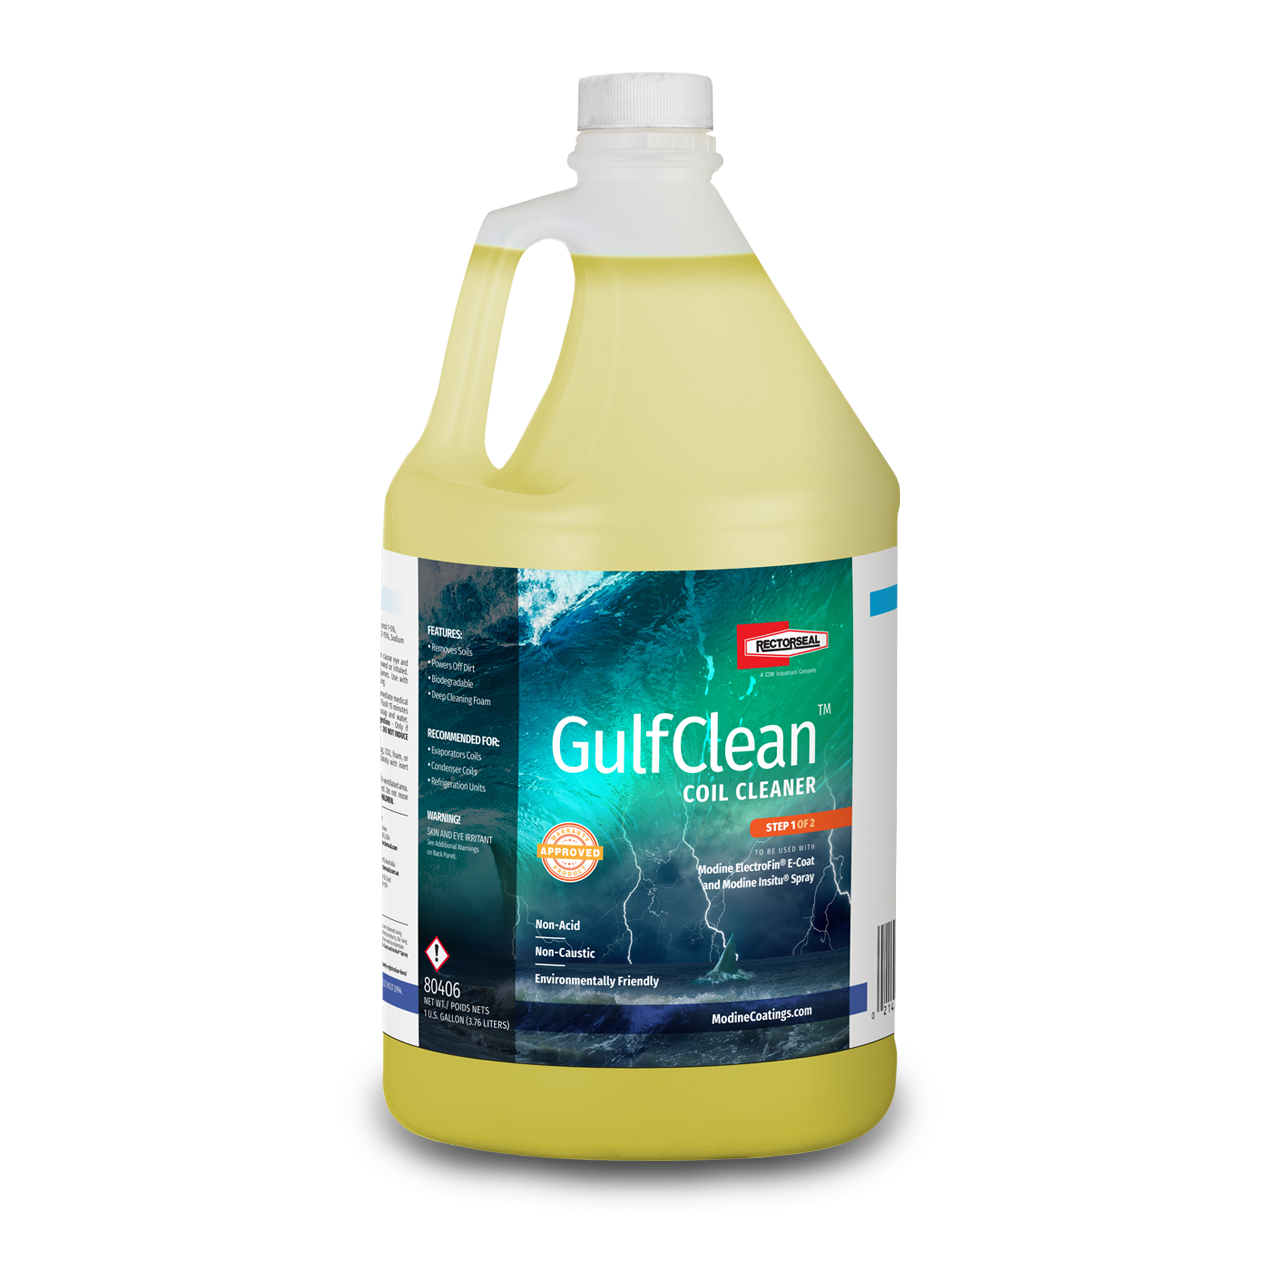 GulfClean® Coil Cleaner Step #1 of 2 4 - 1 Gallon Jugs - Modine Coatings